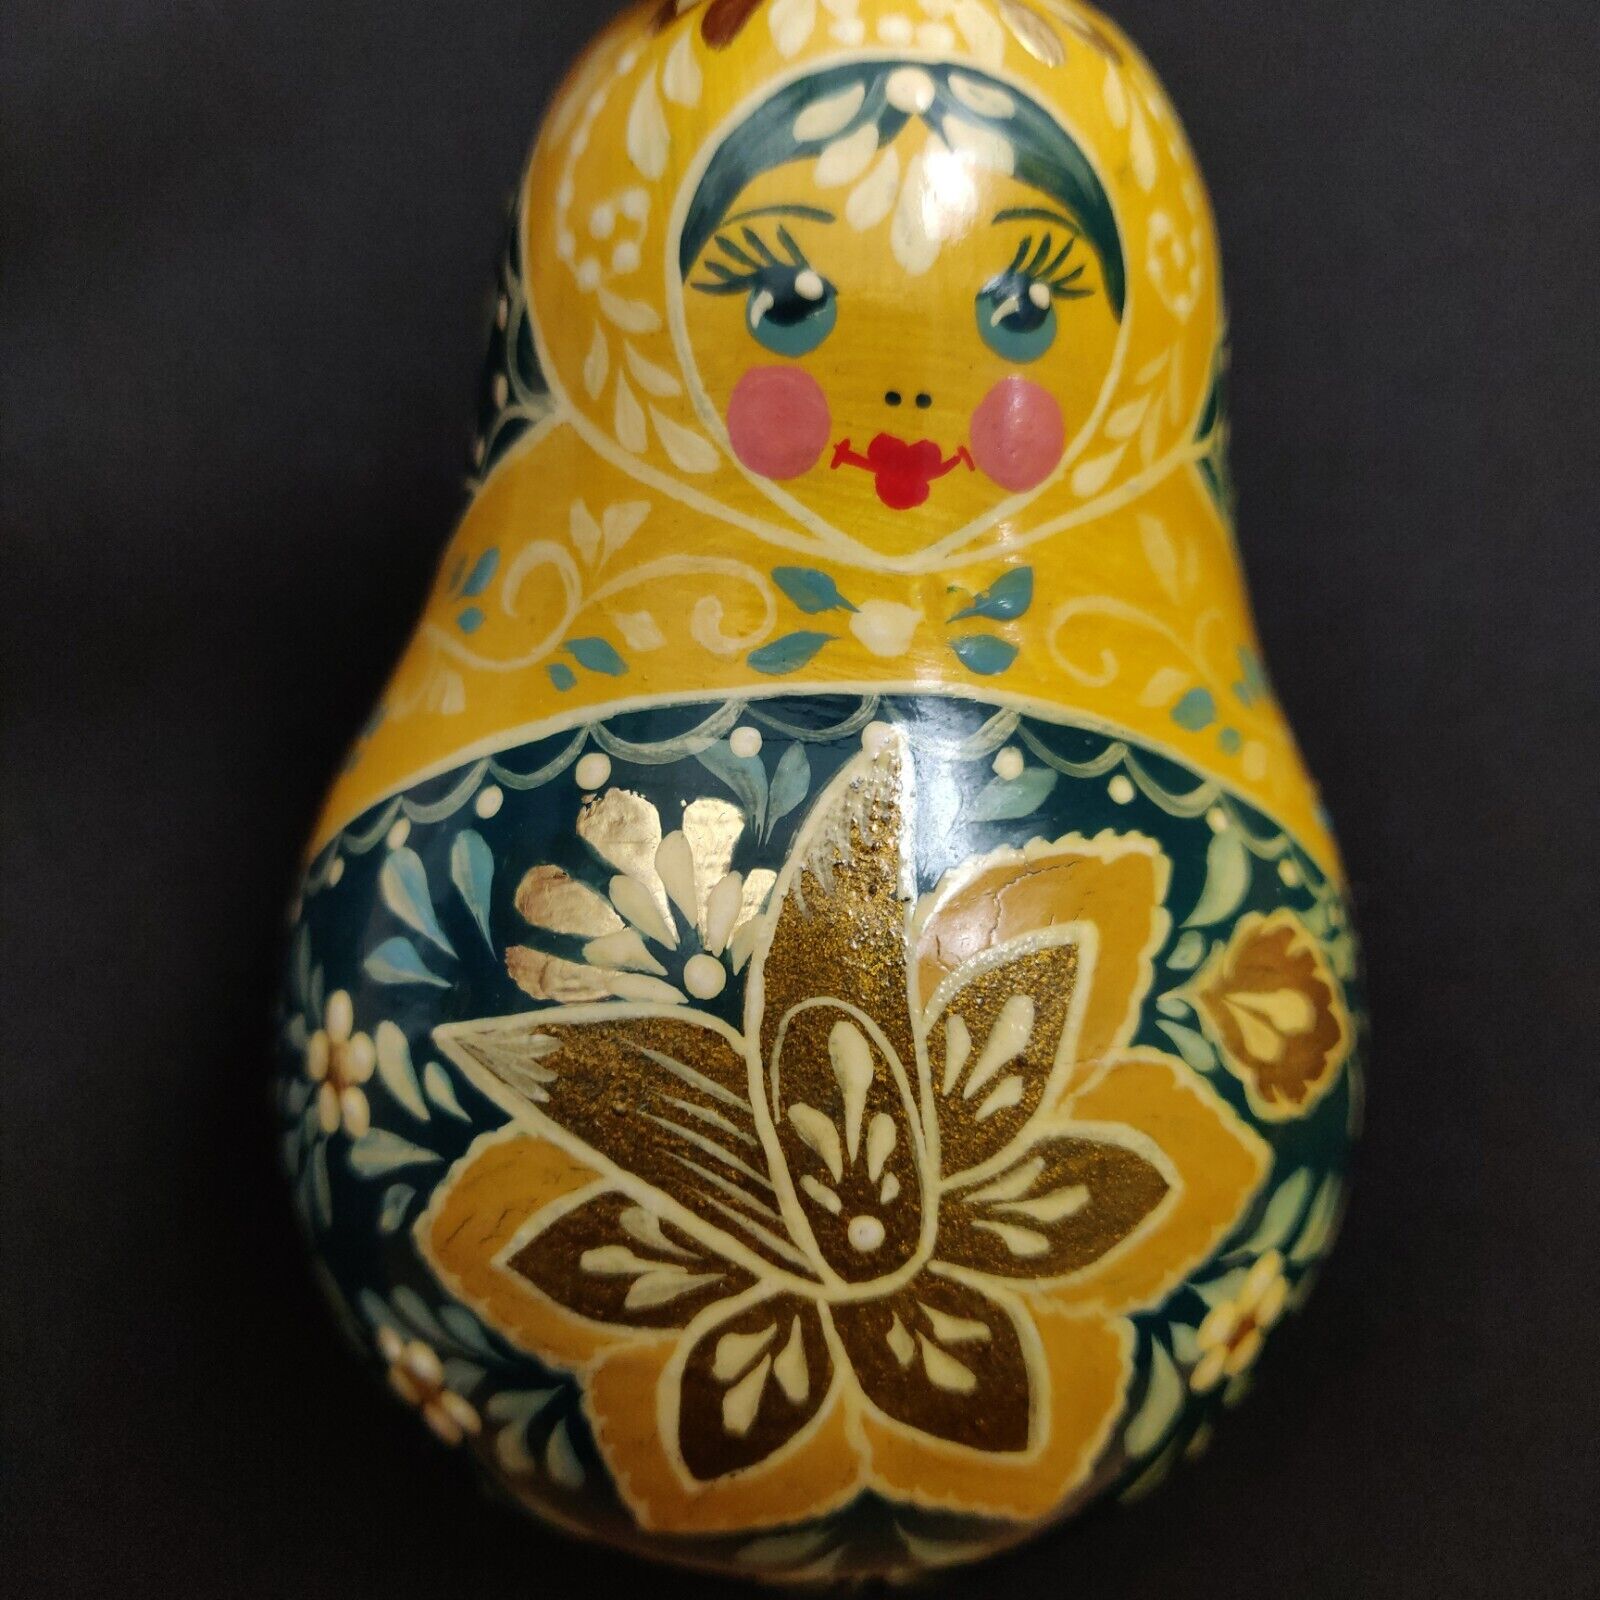 Russian Matryoshka Doll Folk Art Roly Poly Musical Chime Handpainted Vintage